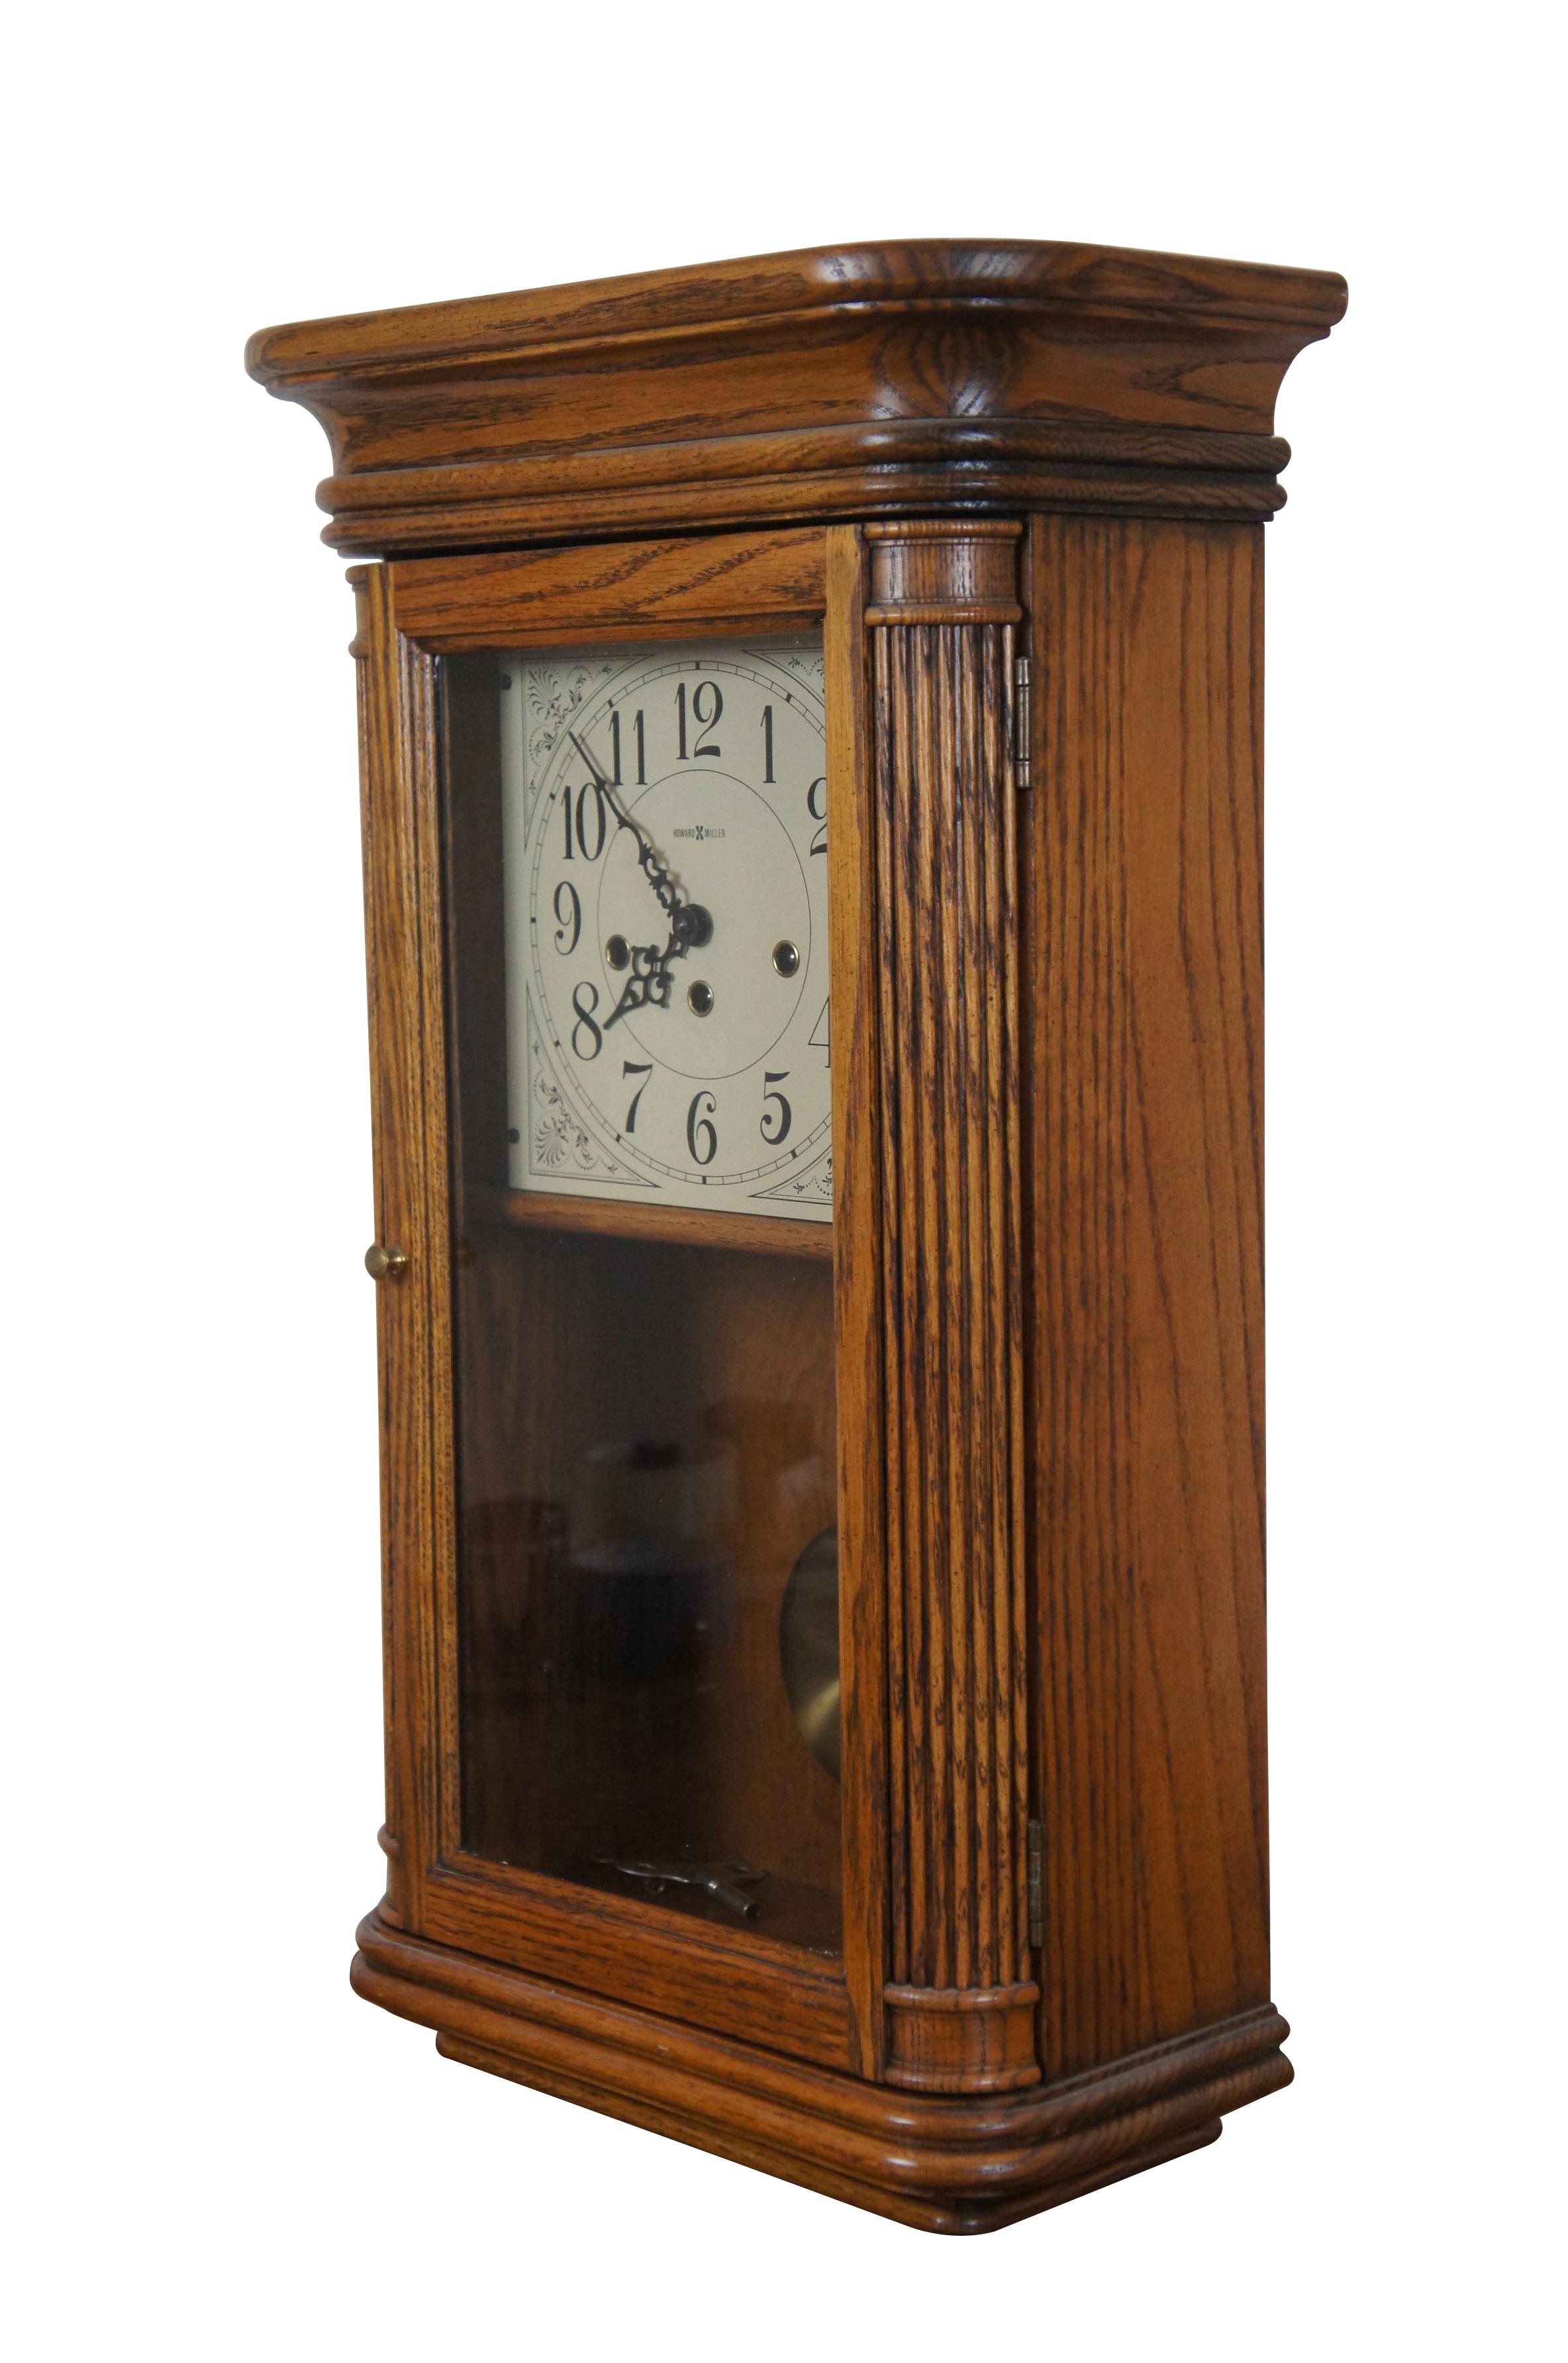 Vintage Sandringham wall clock by the Howard Miller Clock Company, Model 613-108, hand wound, Westminster chime, Yorkshire Oak. Molded base and flared pediment with rounded corners, fluted columns flanking the glass front with pendulum, off white